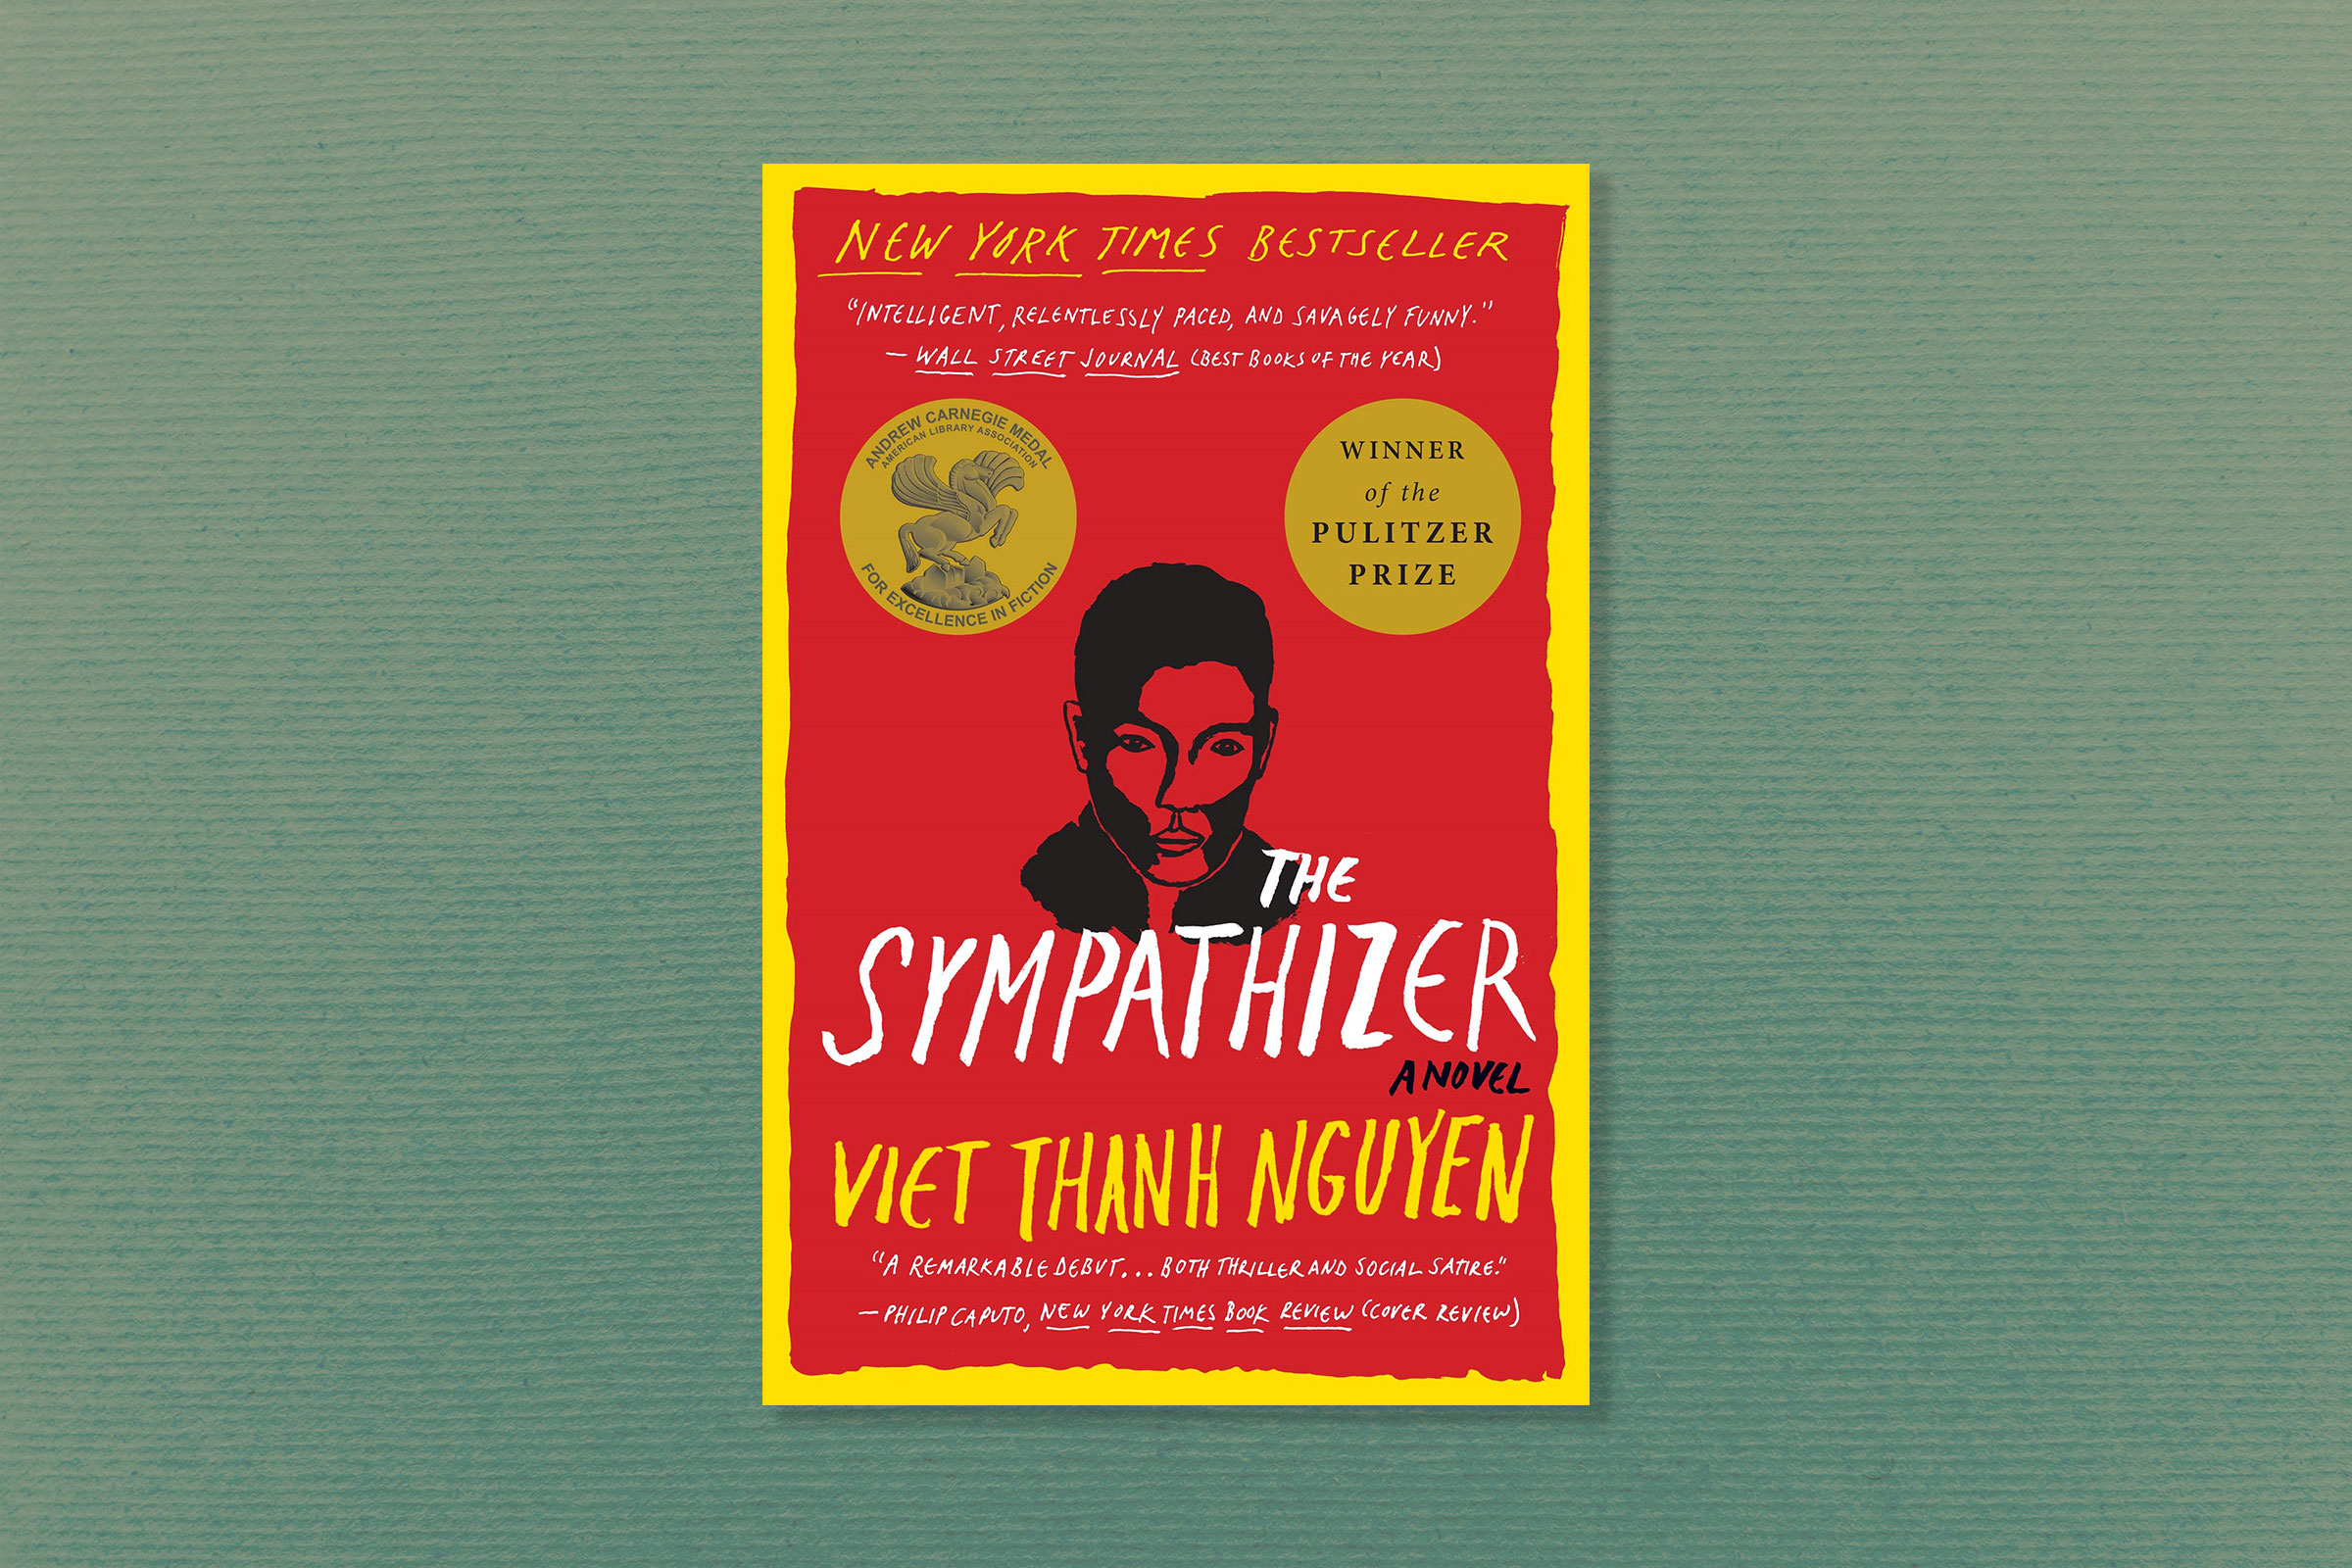 The Sympathizer, Viet Thanh Nguyen